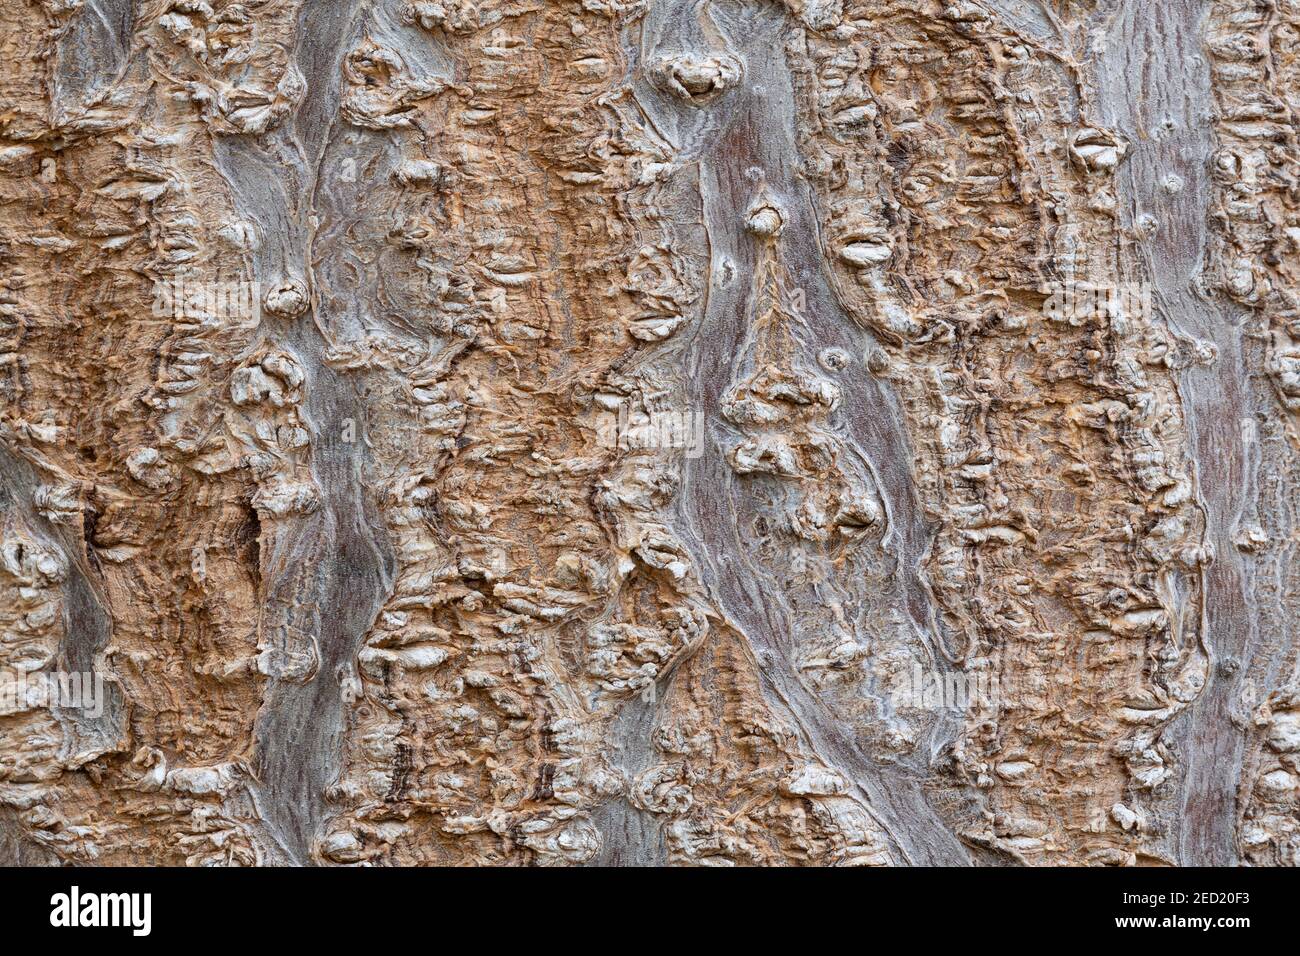 Pawlownia tree bark close-up shot. Paulownia tomentosa bark surface. Natural structure of the rhytidome - crushed outer bark. Outer sheath of the trun Stock Photo